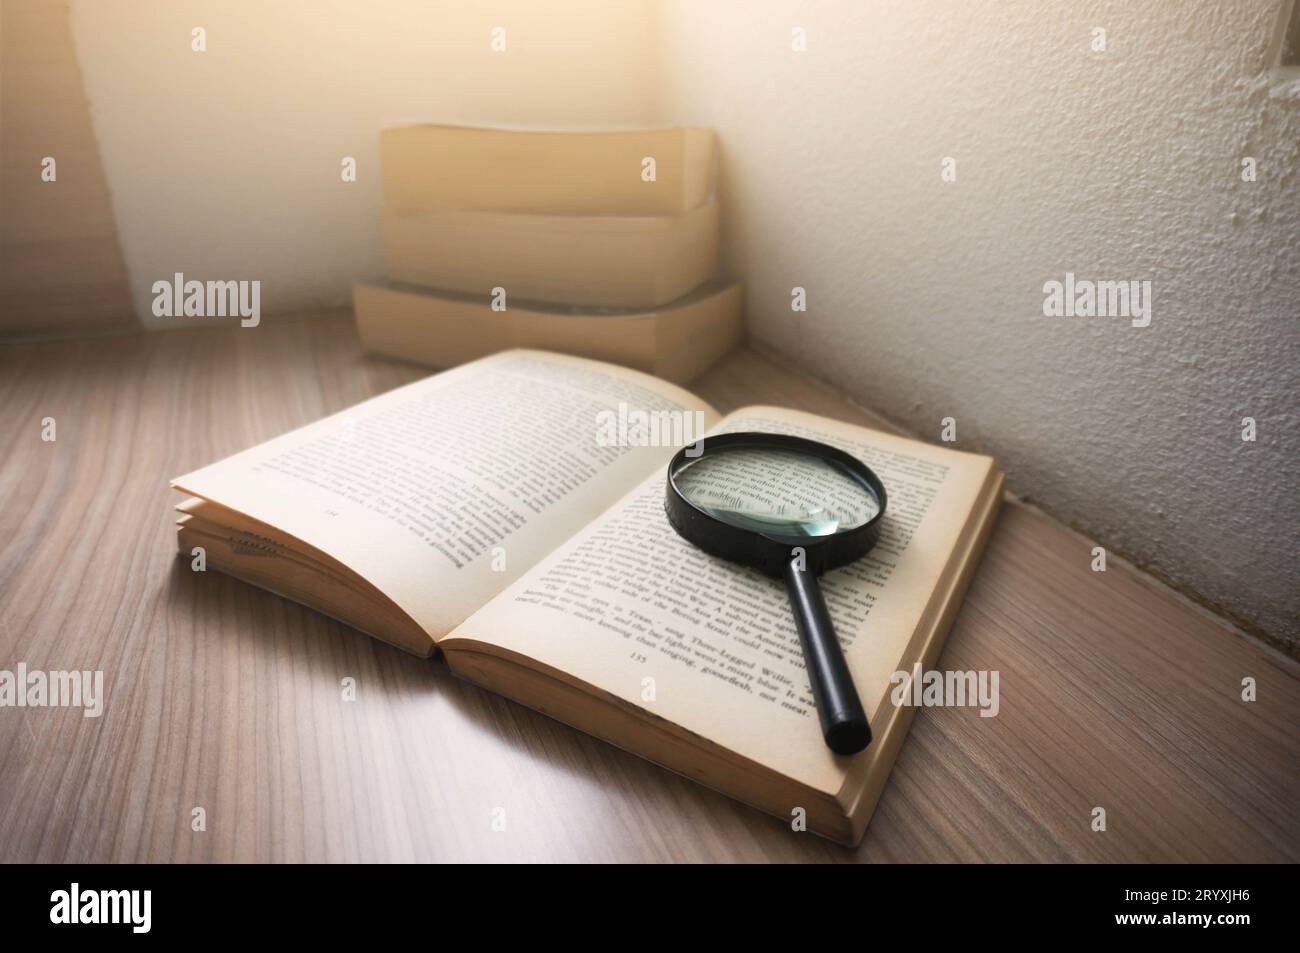 Magnification glass over a opened book with window light Stock Photo